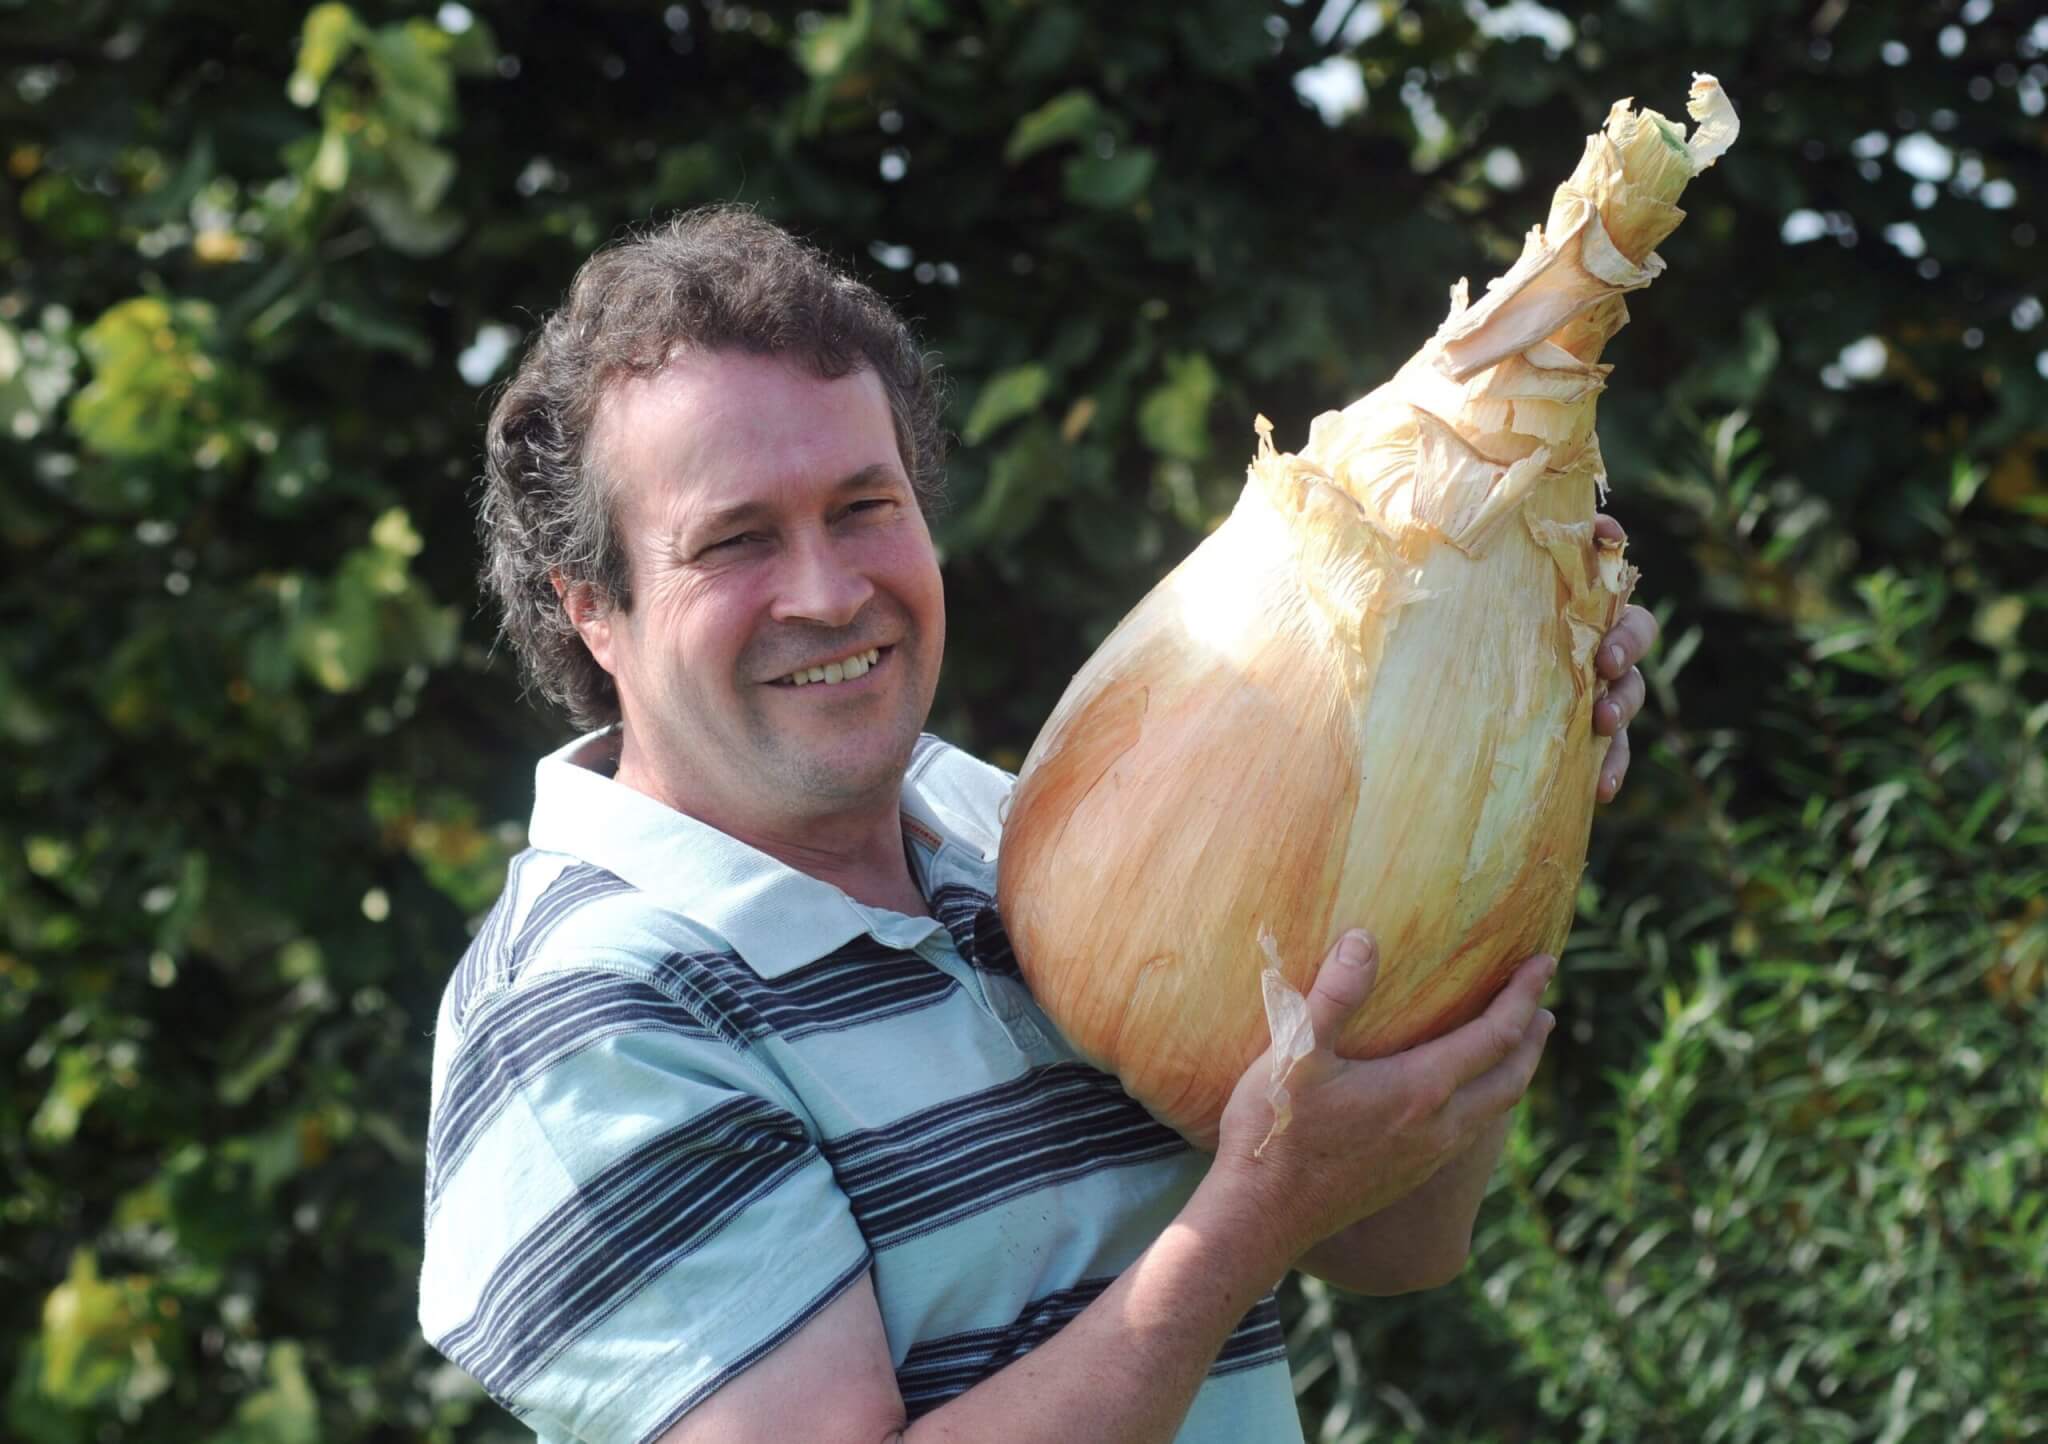 Tony Glover of Short Heath, Derbyshire with his world record onion weighing 18 pounds 11.5 ounces